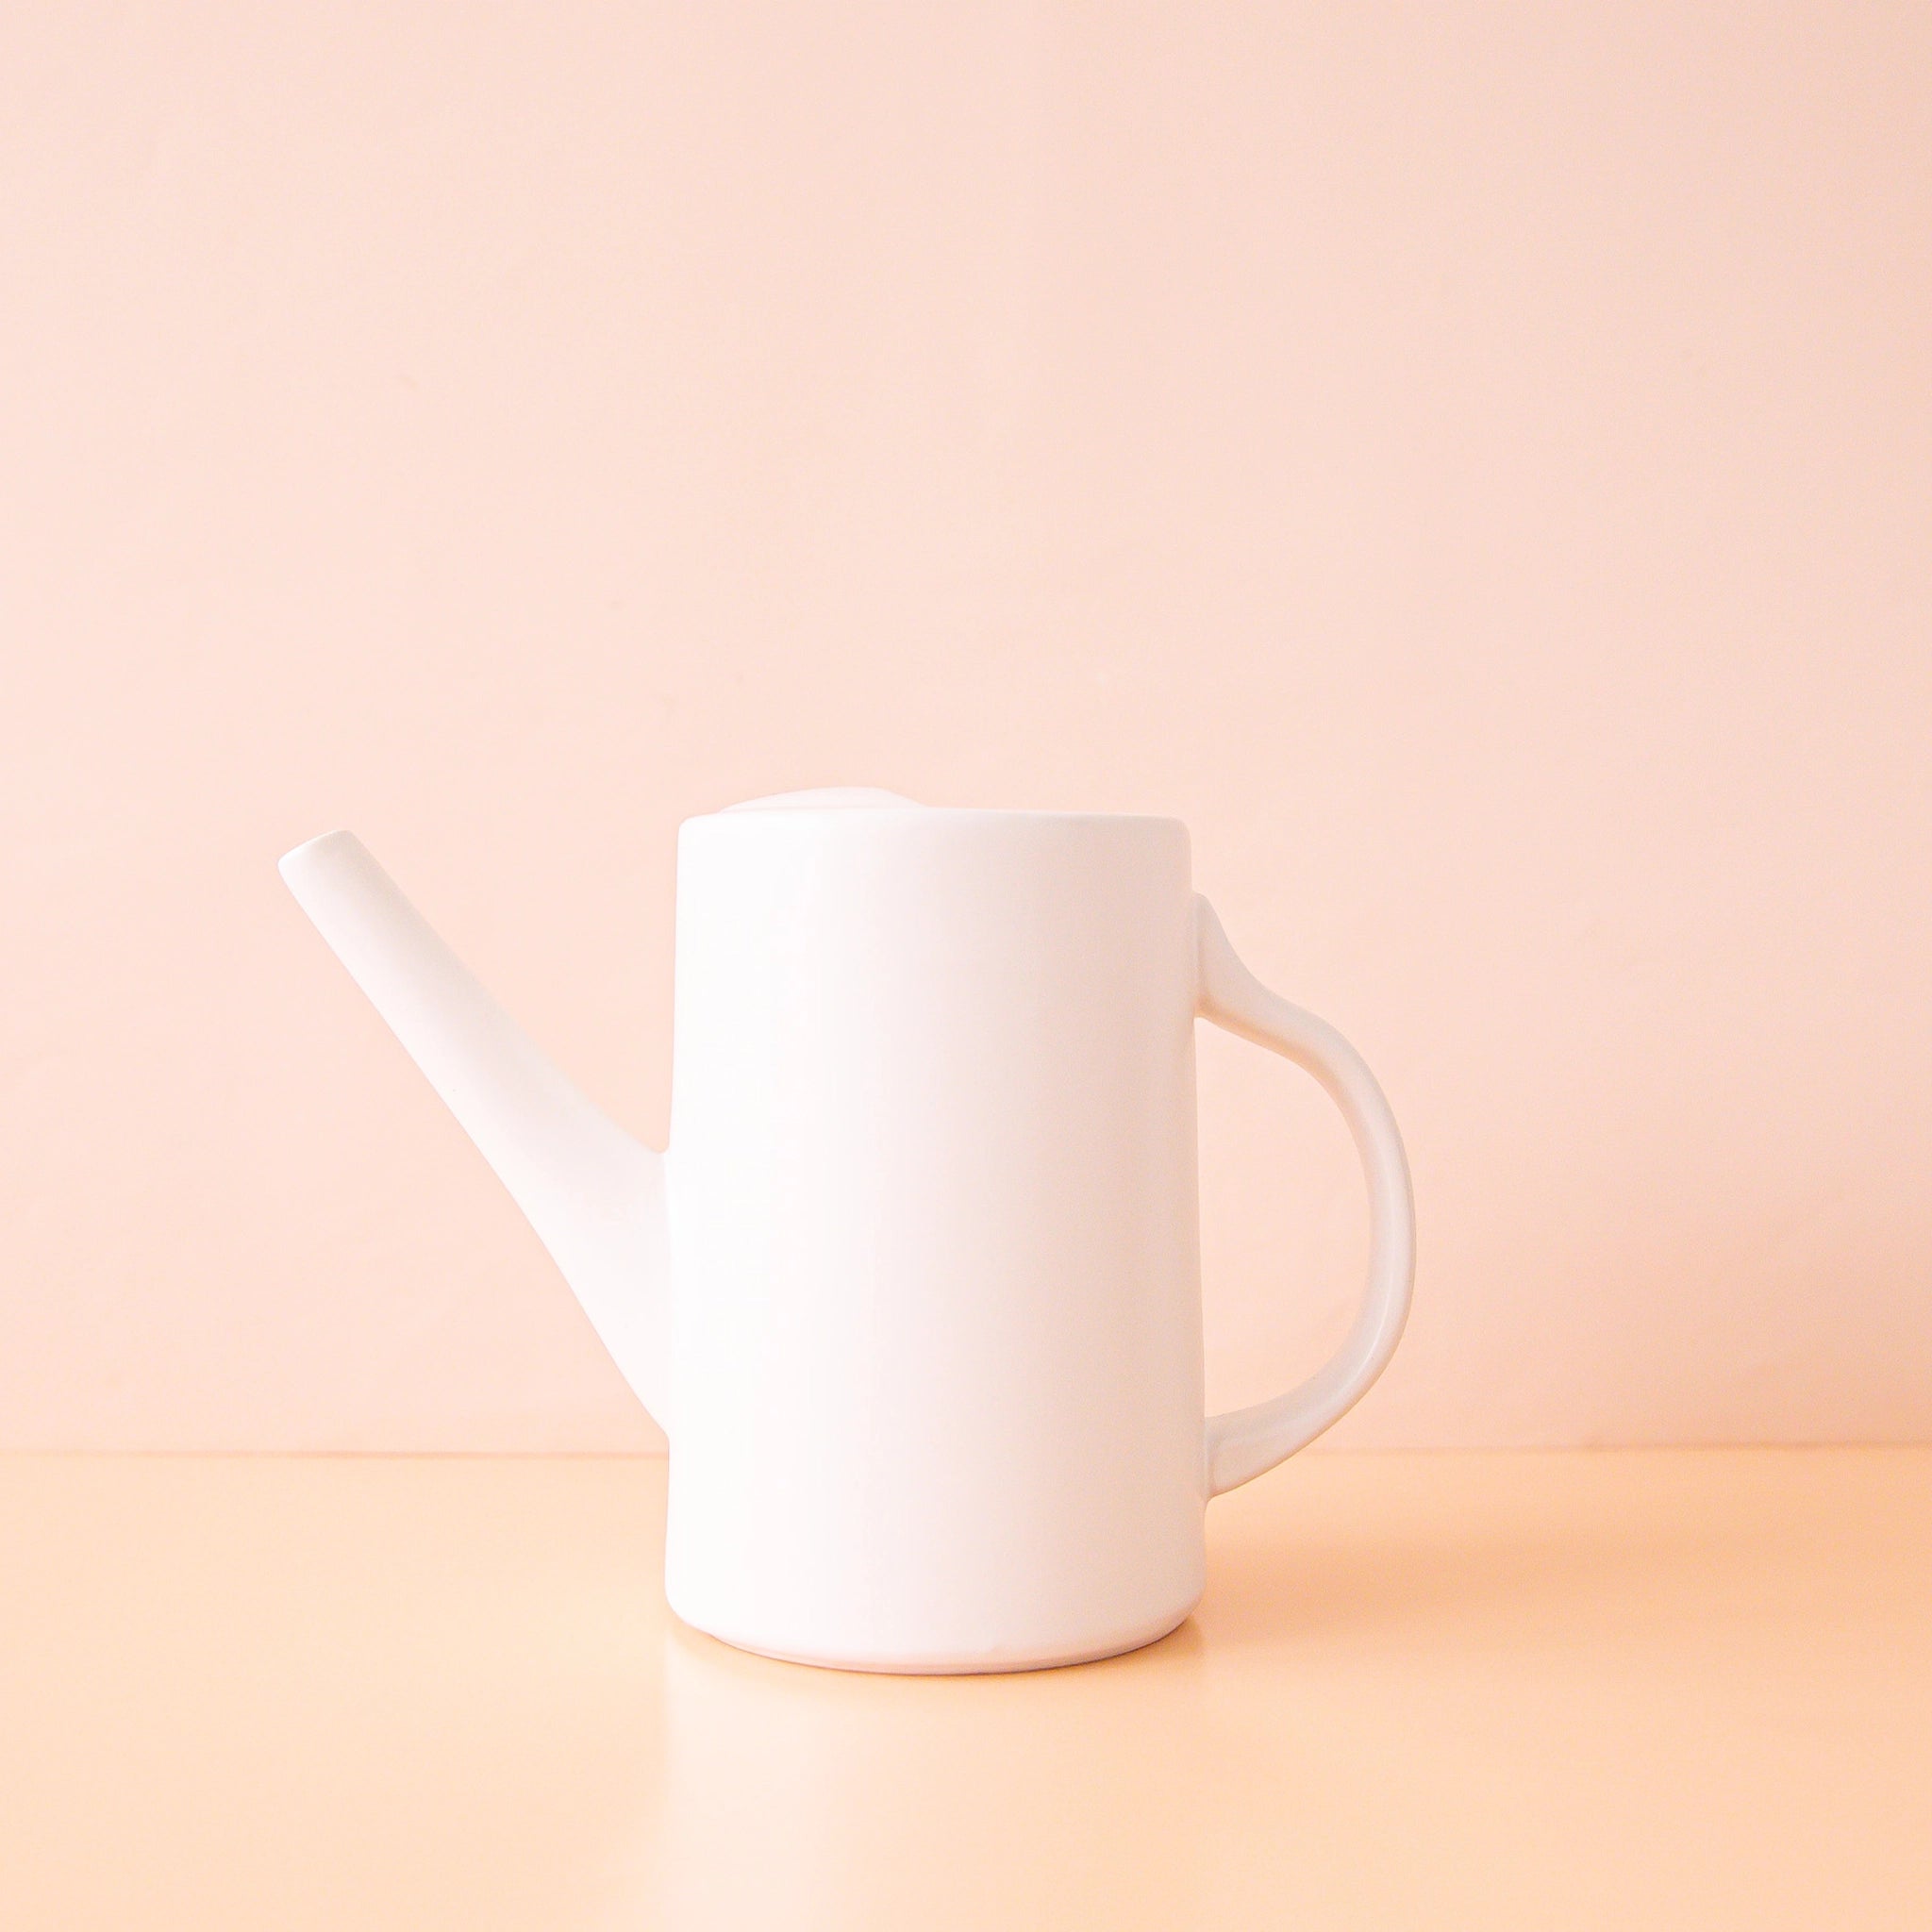 On a peach background is a white ceramic watering can with a narrow spout and a curved handle.